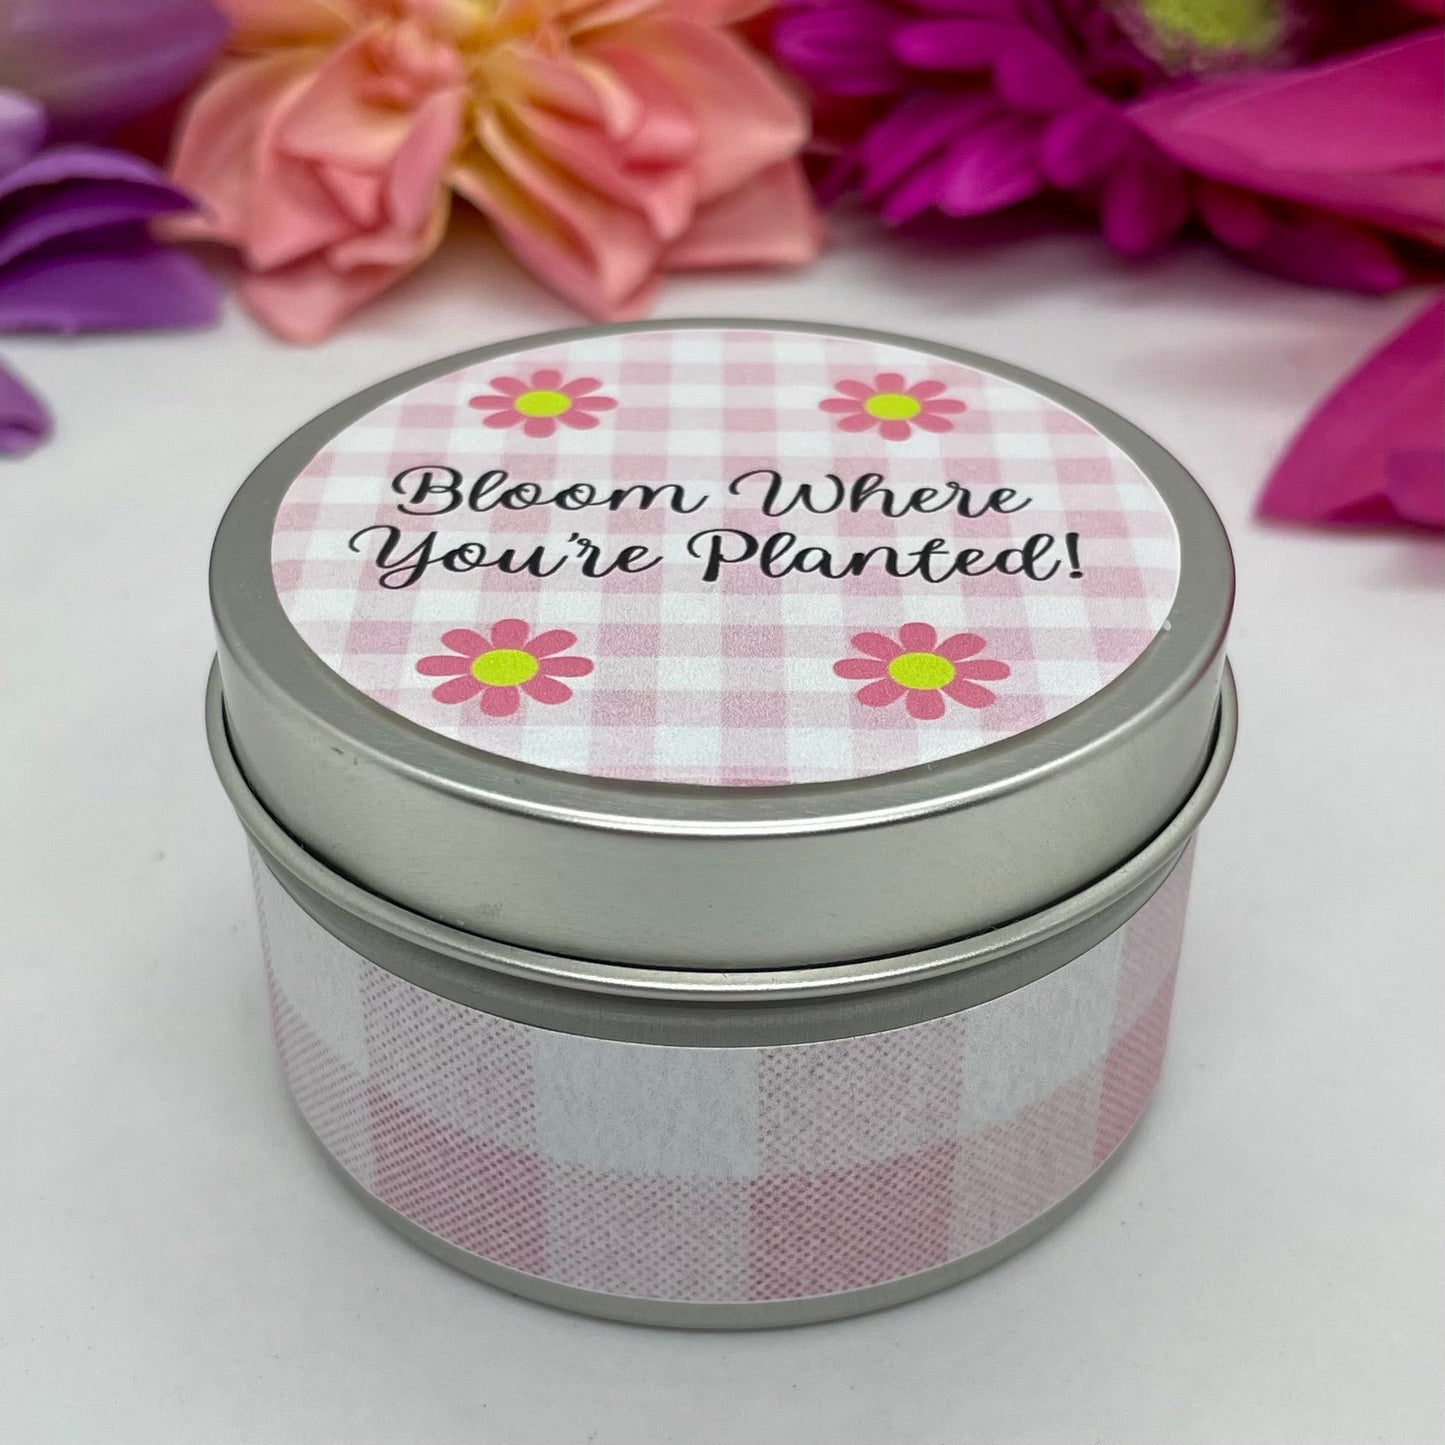 BLOOM WHERE YOU'RE PLANTED! - Jamcat Candles